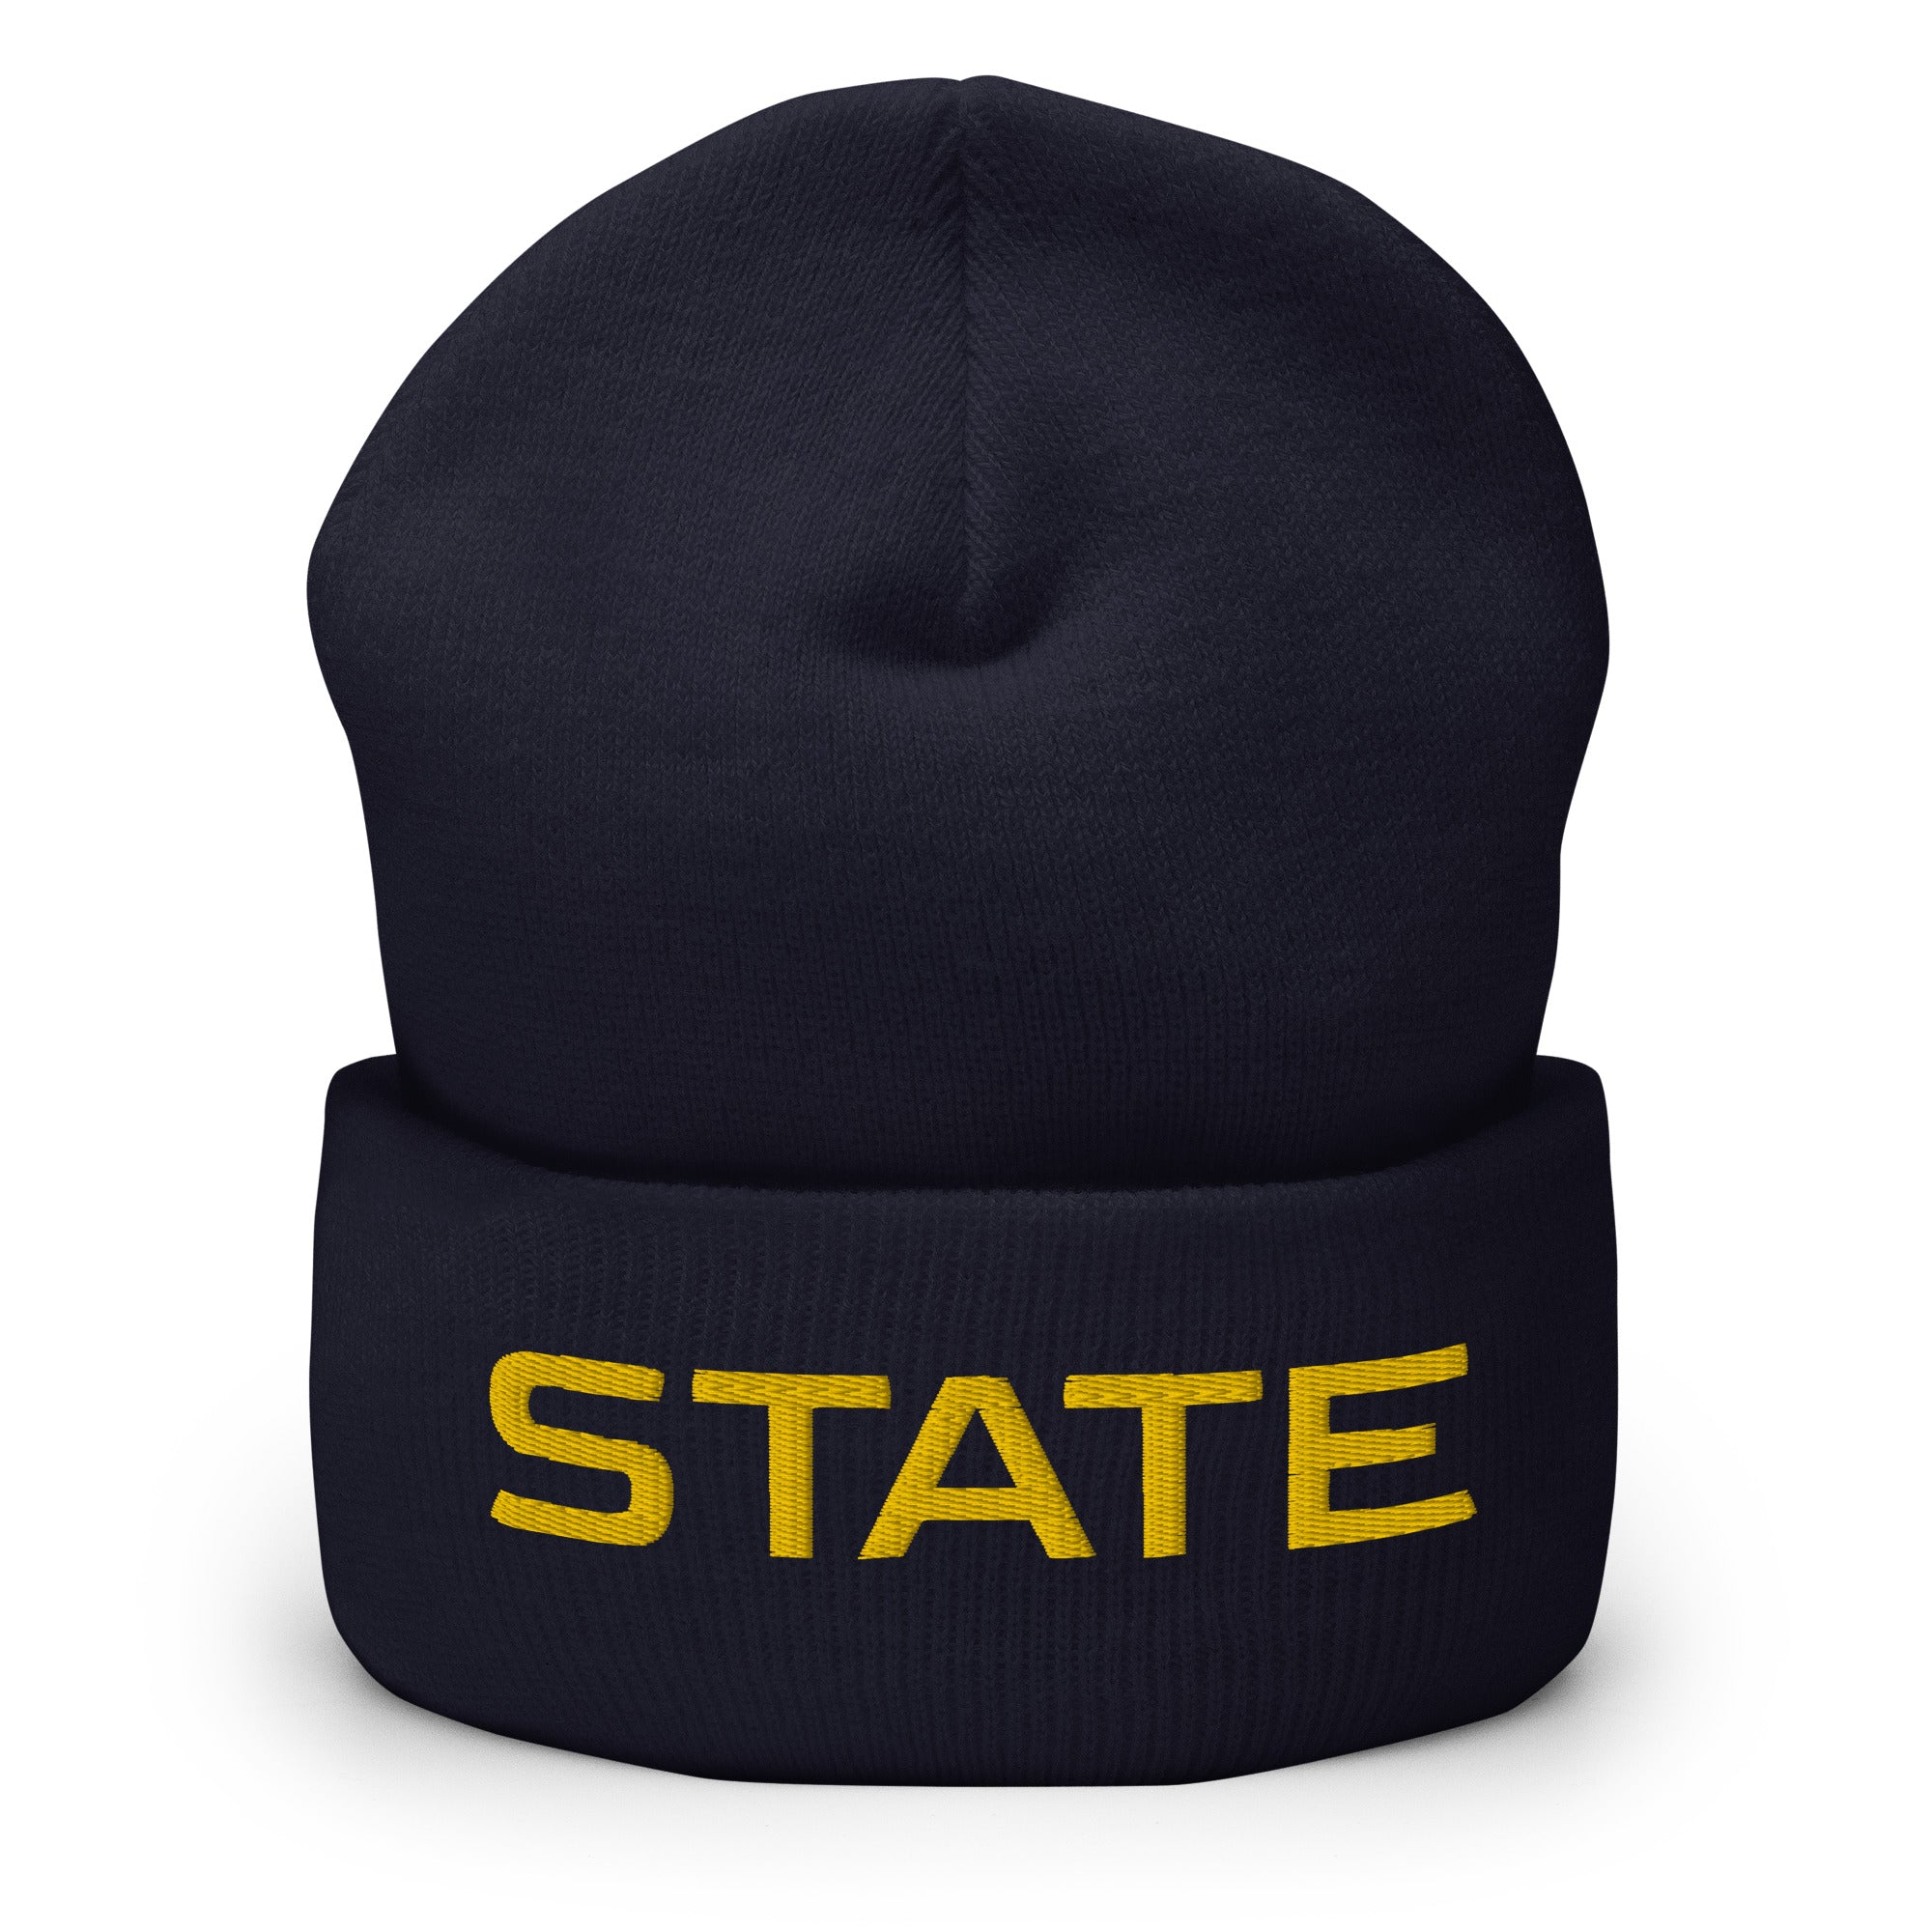 STATE Embroidered Cuffed Beanie – DO IT FOR SDSTATE